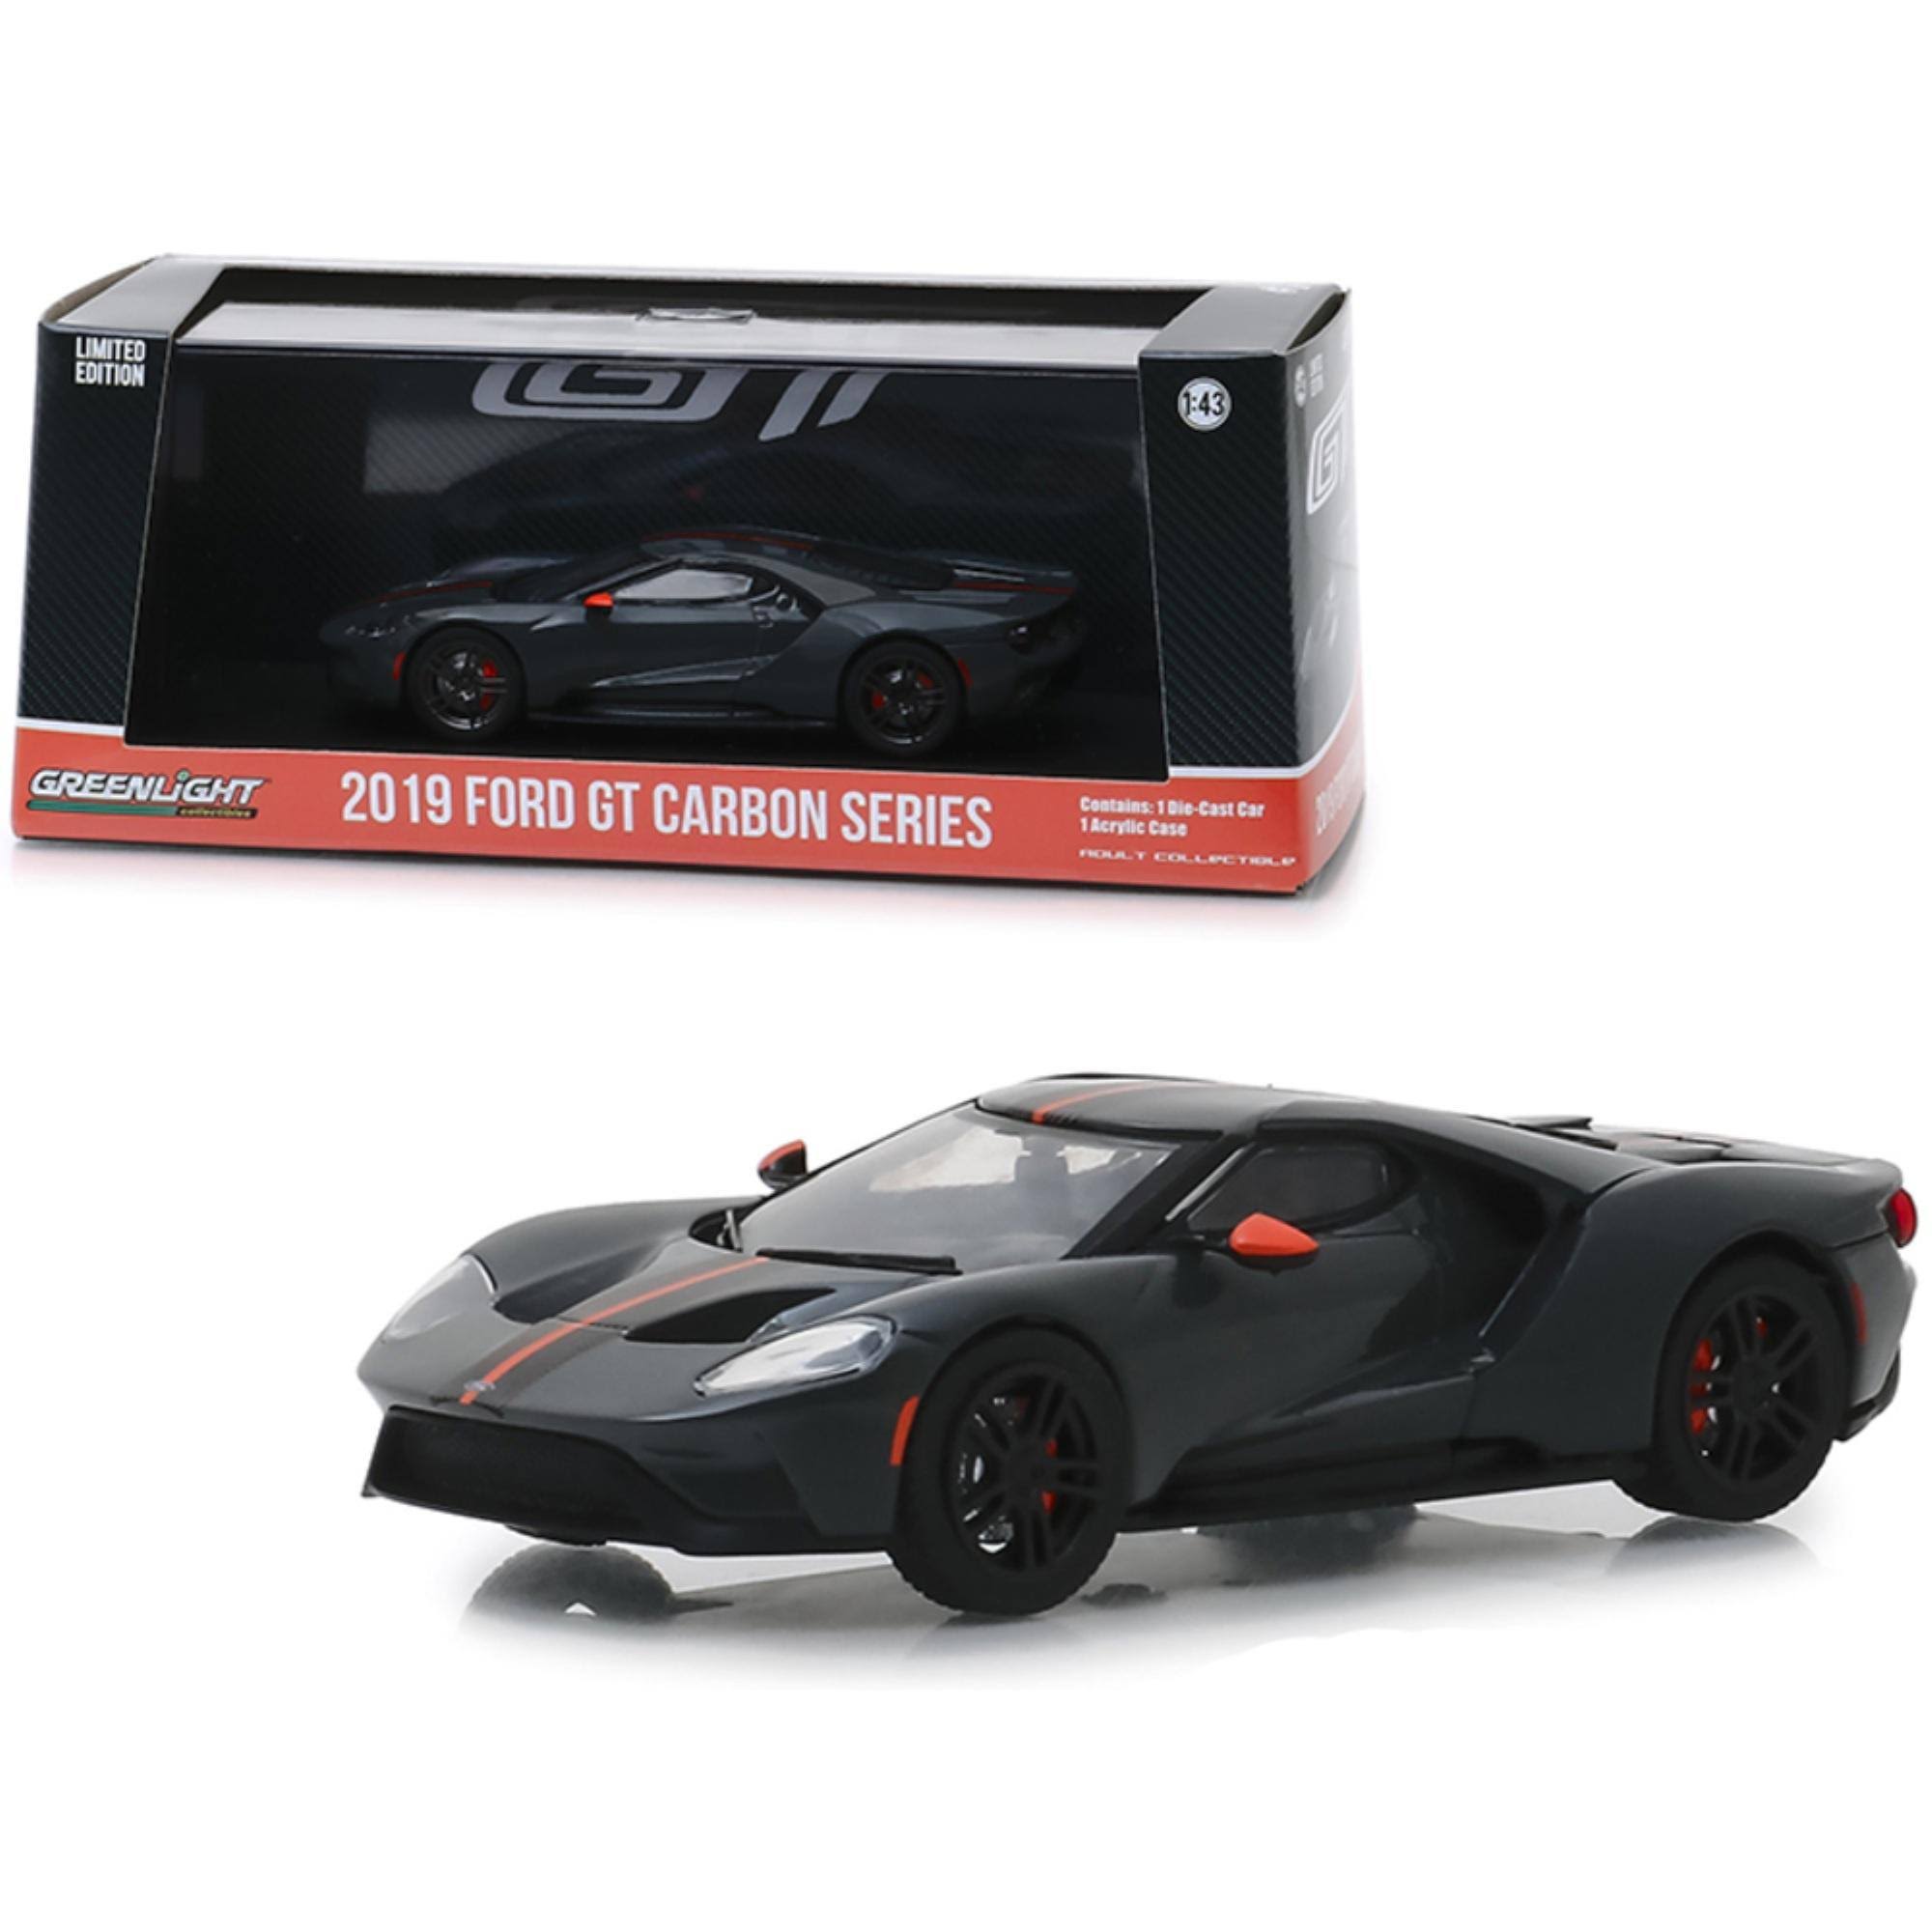 2019 Ford GT Carbon Series with Orange Accents 1/43 Diecast Model Car by Greenlight